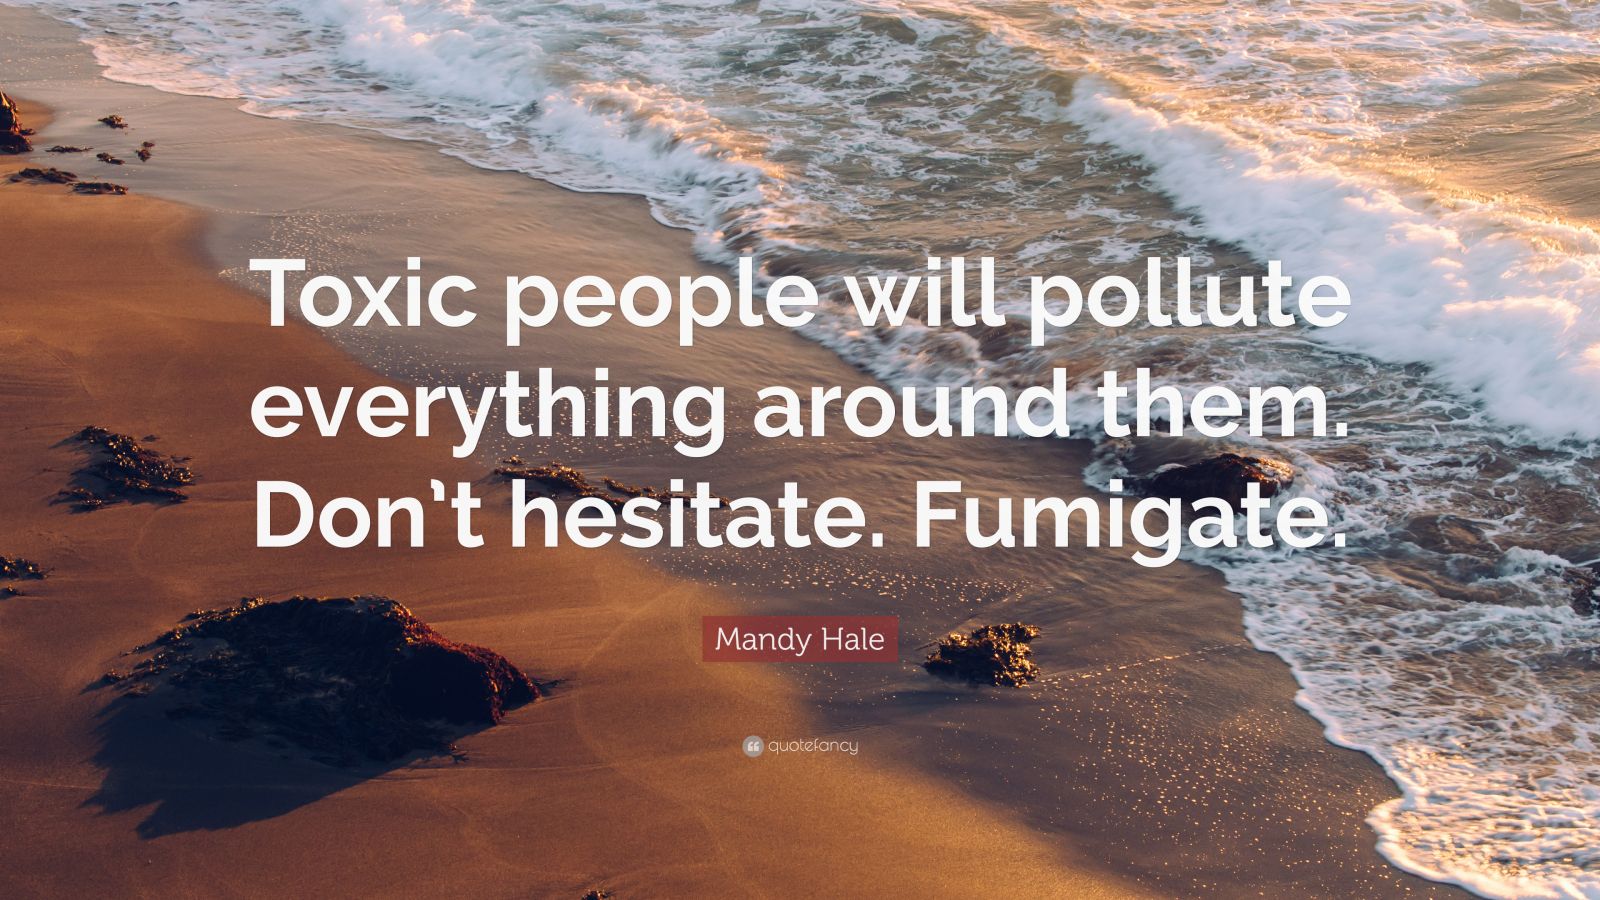 Mandy Hale Quote: “Toxic people will pollute everything around them